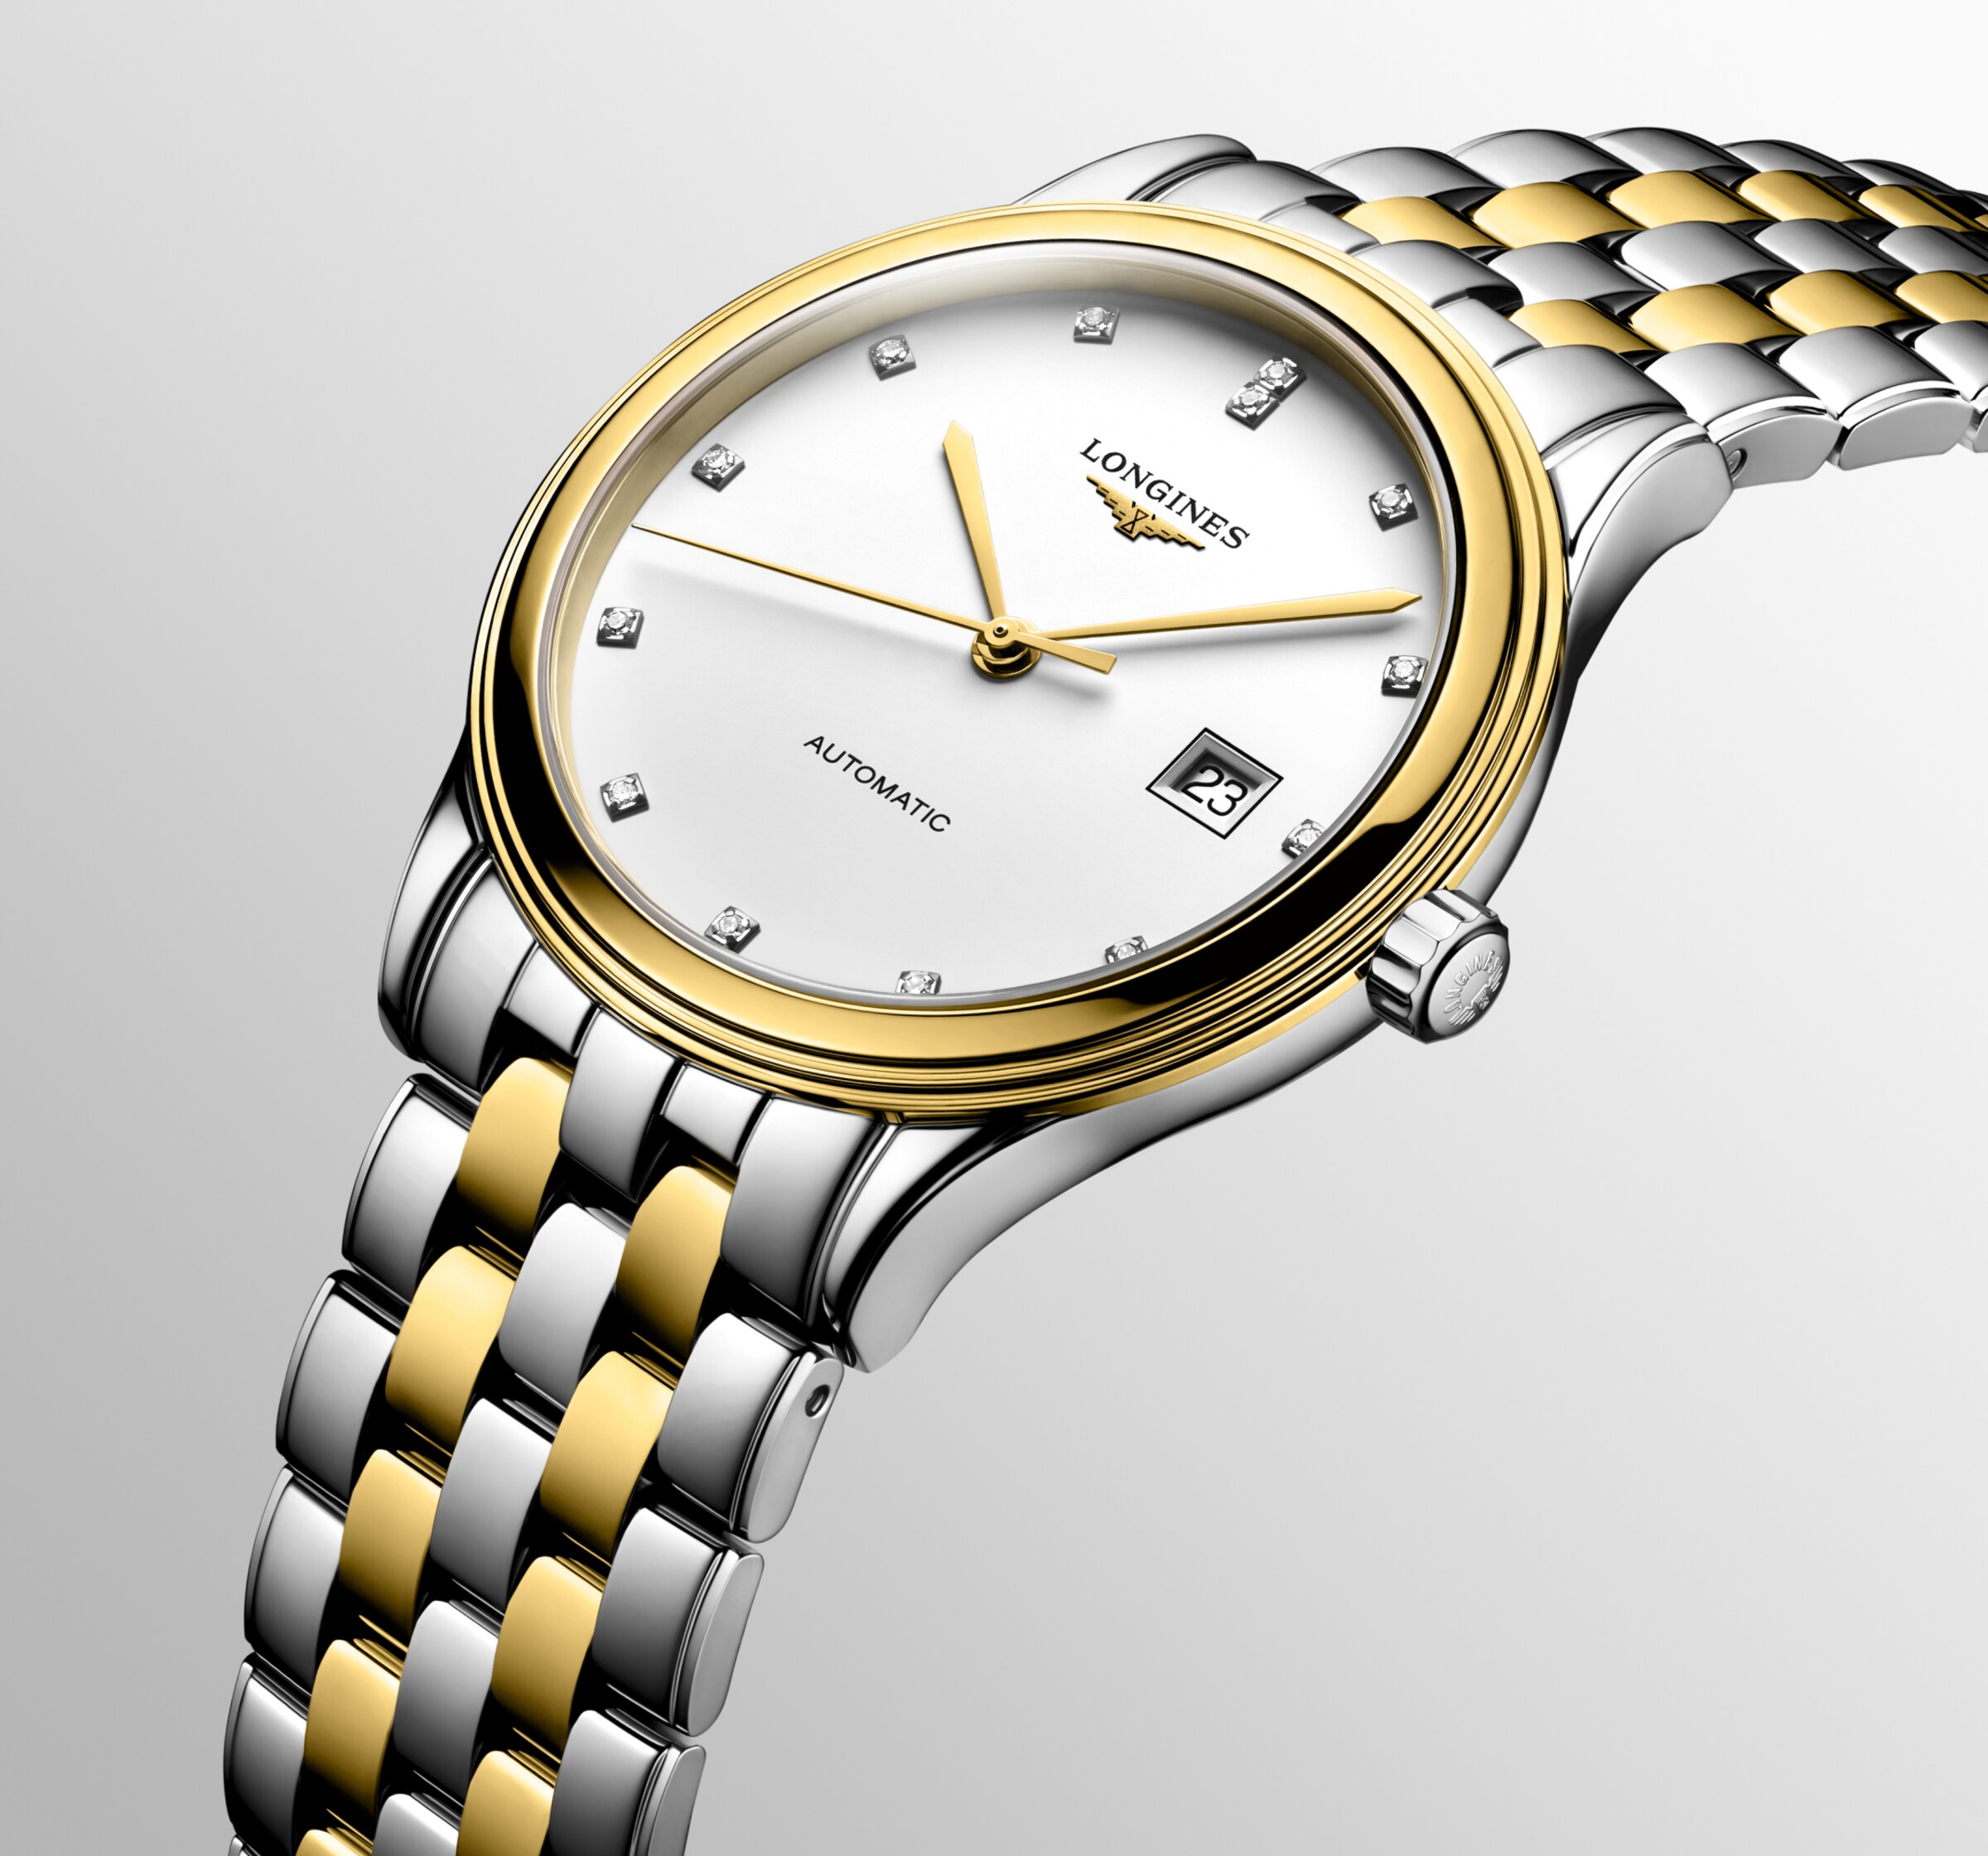 Longines FLAGSHIP Automatic Stainless steel and yellow PVD coating Watch - L4.984.3.27.7